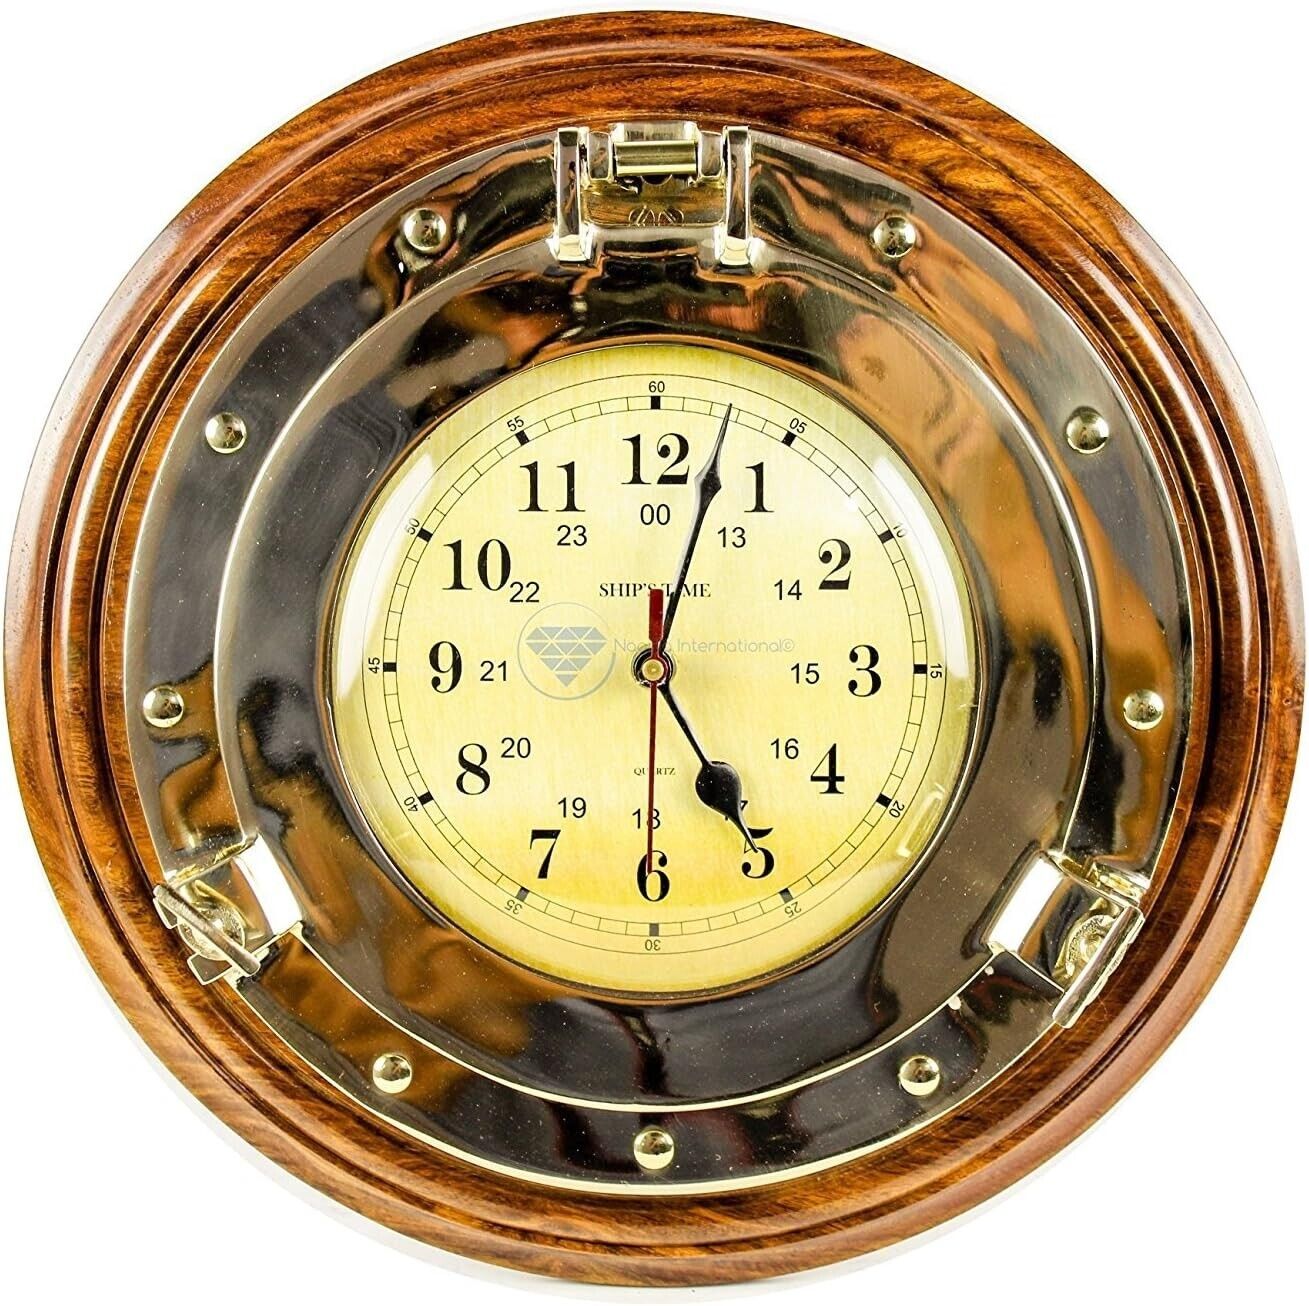 Elite Nautical Solid Brass Porthole Time's Wall Clock with Wooden Rosewood Base